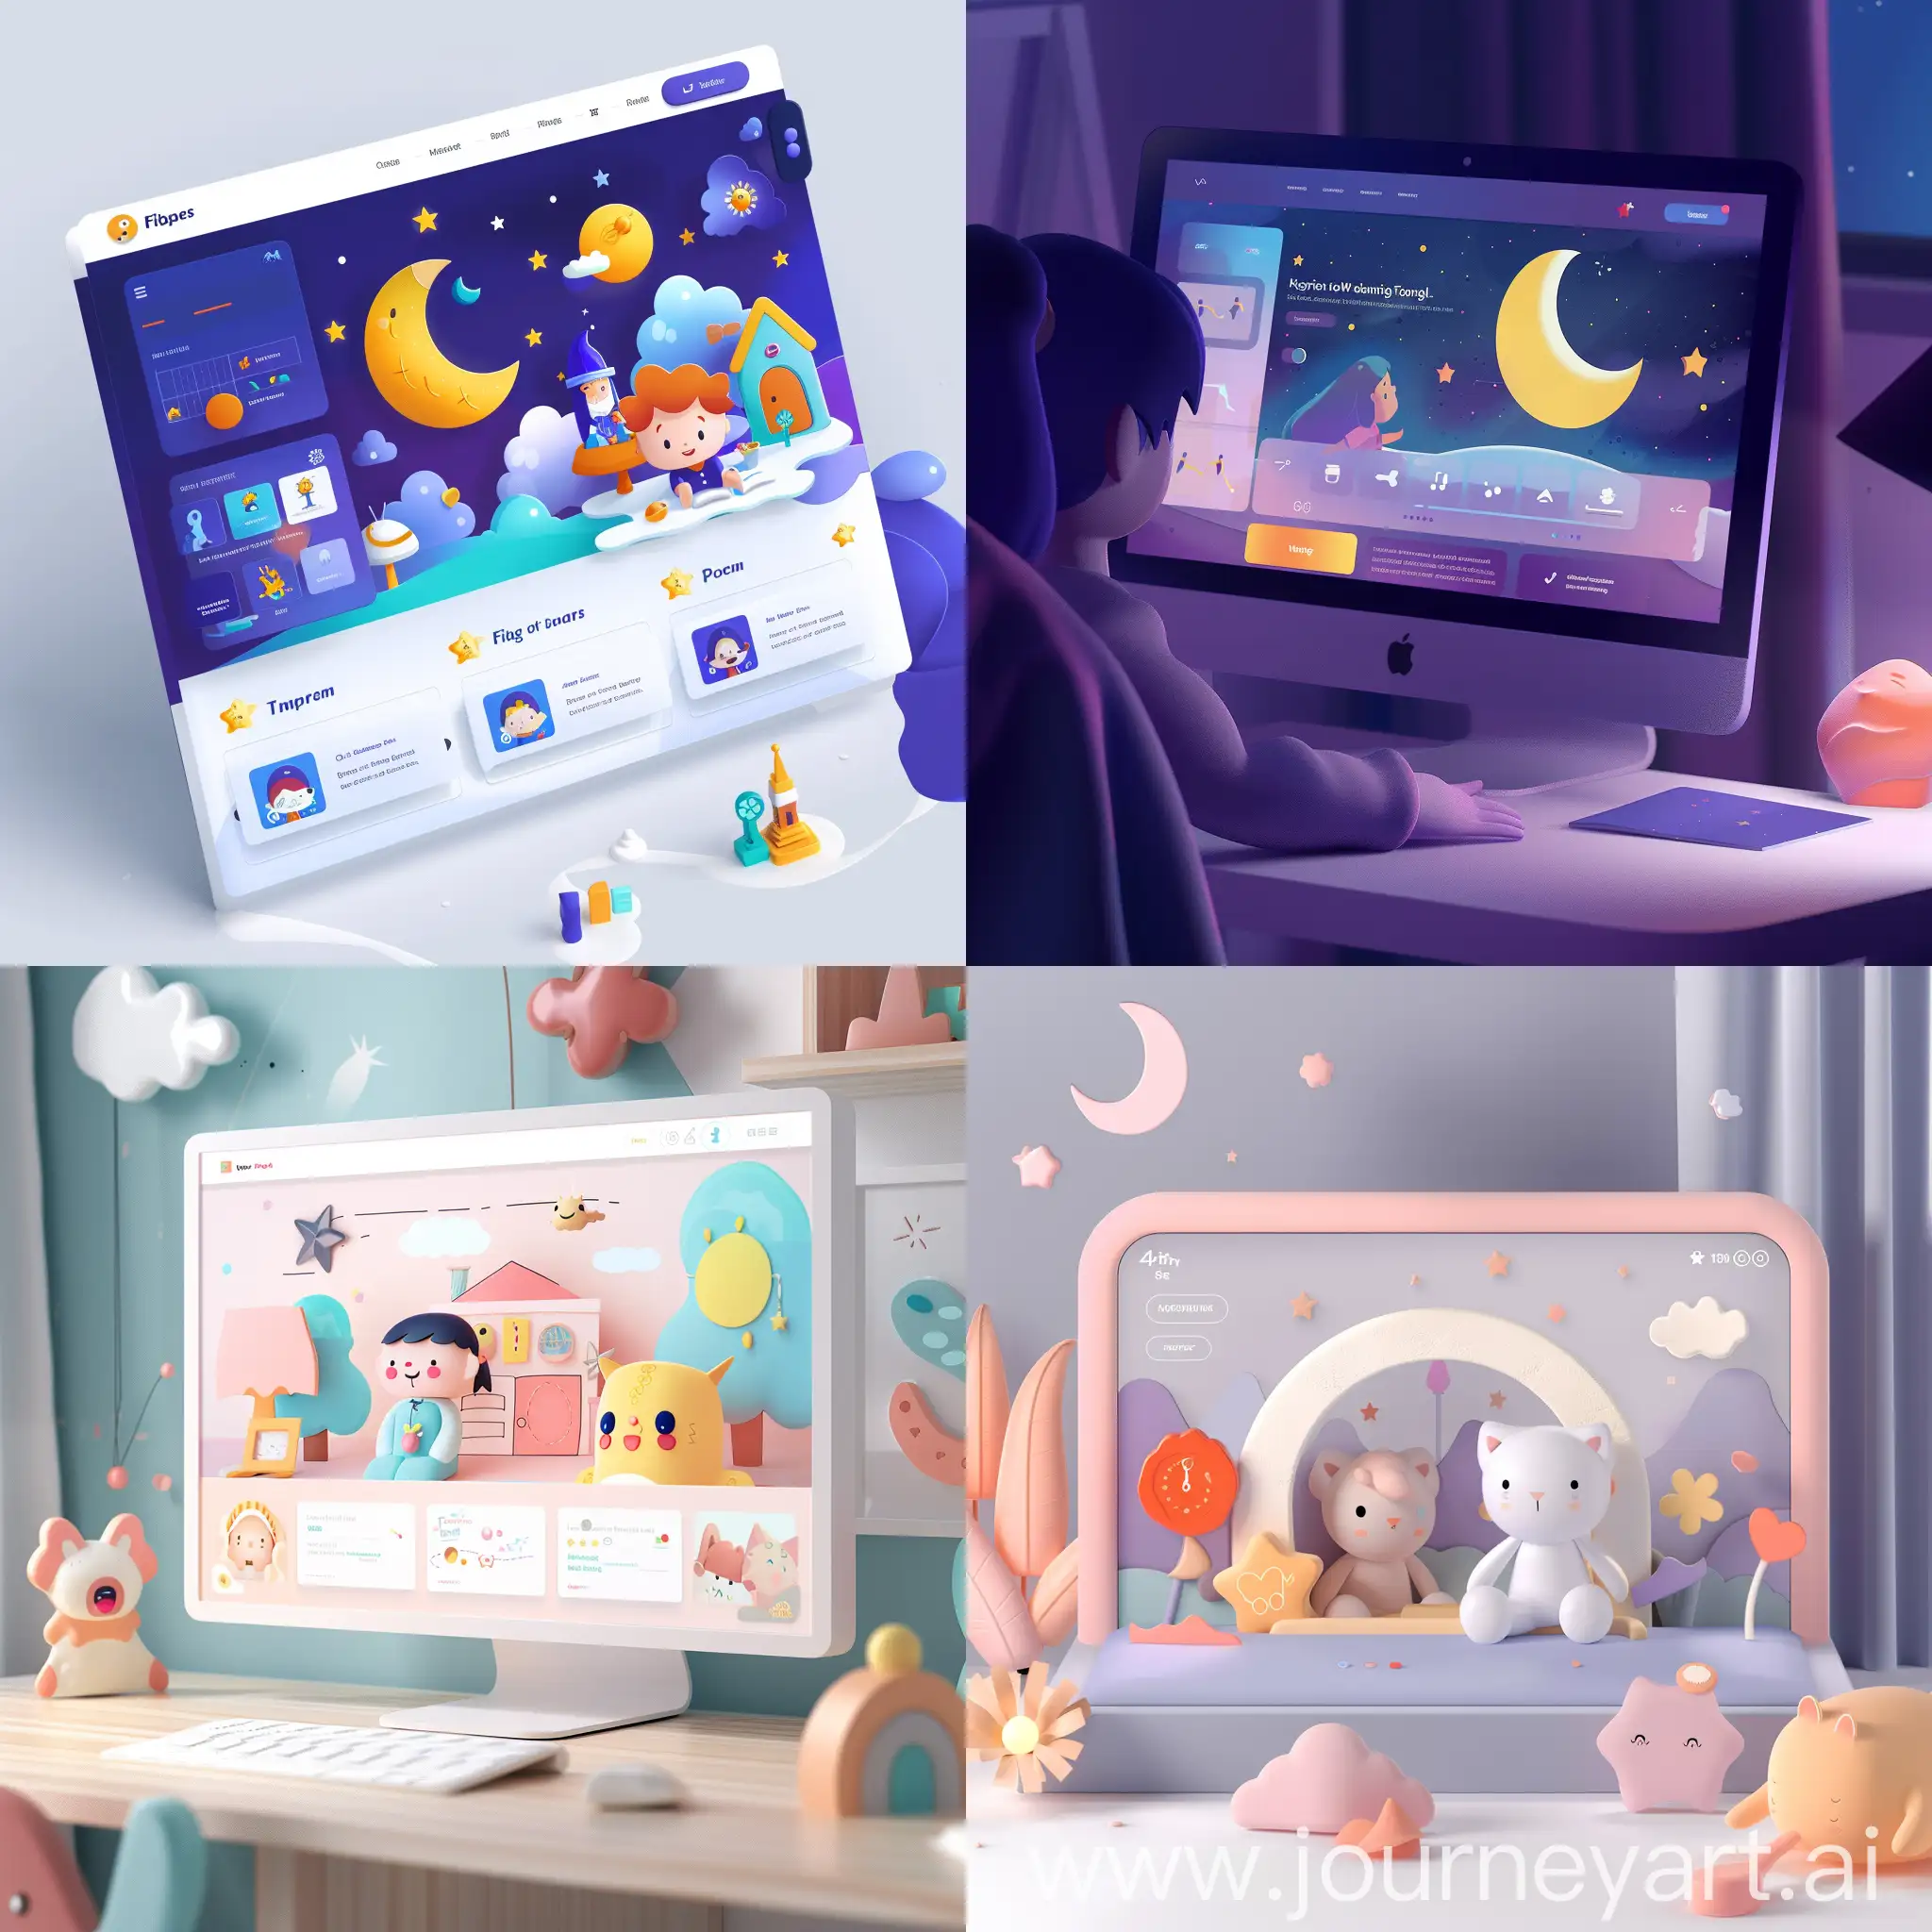 Childrens-Bedtime-Story-Website-Interface-in-High-Quality-4K-Resolution